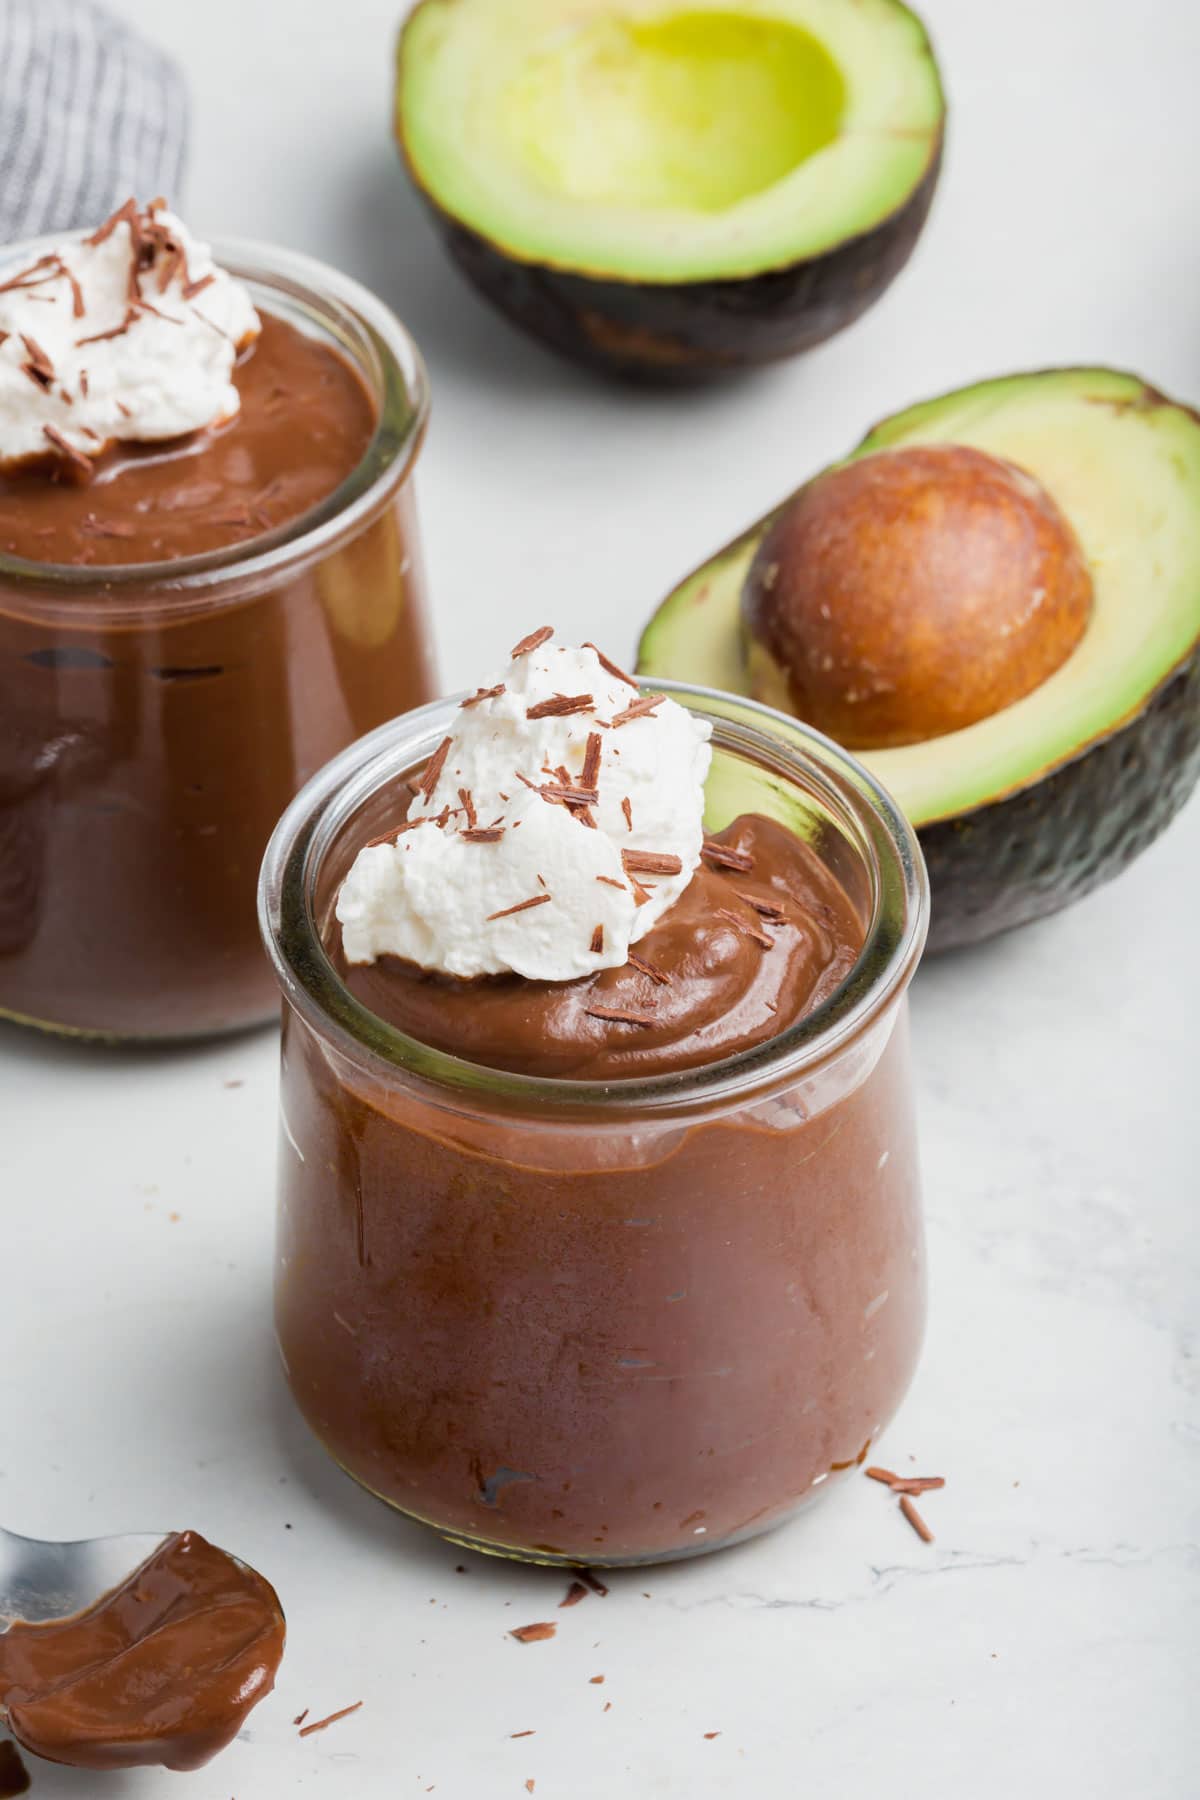 Two jars of chocolate avocado pudding with coconut whipped cream on top with avocados in the background.